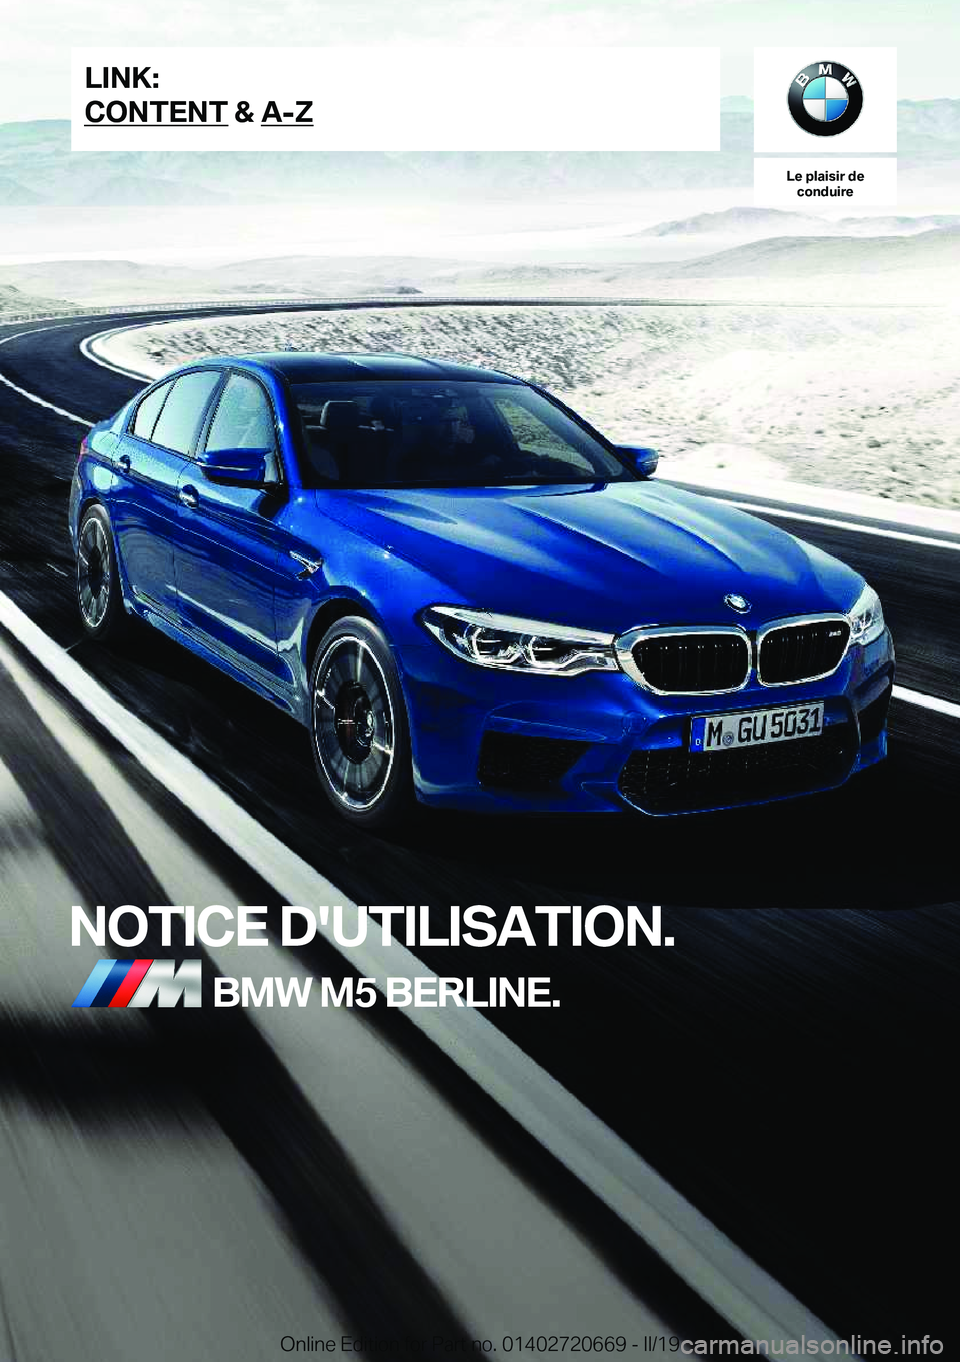 BMW M5 2019  Notices Demploi (in French) �L�e��p�l�a�i�s�i�r��d�e�c�o�n�d�u�i�r�e
�N�O�T�I�C�E��D�'�U�T�I�L�I�S�A�T�I�O�N�.�B�M�W��M�5��B�E�R�L�I�N�E�.�L�I�N�K�:
�C�O�N�T�E�N�T��&��A�-�Z�O�n�l�i�n�e��E�d�i�t�i�o�n��f�o�r��P�a�r